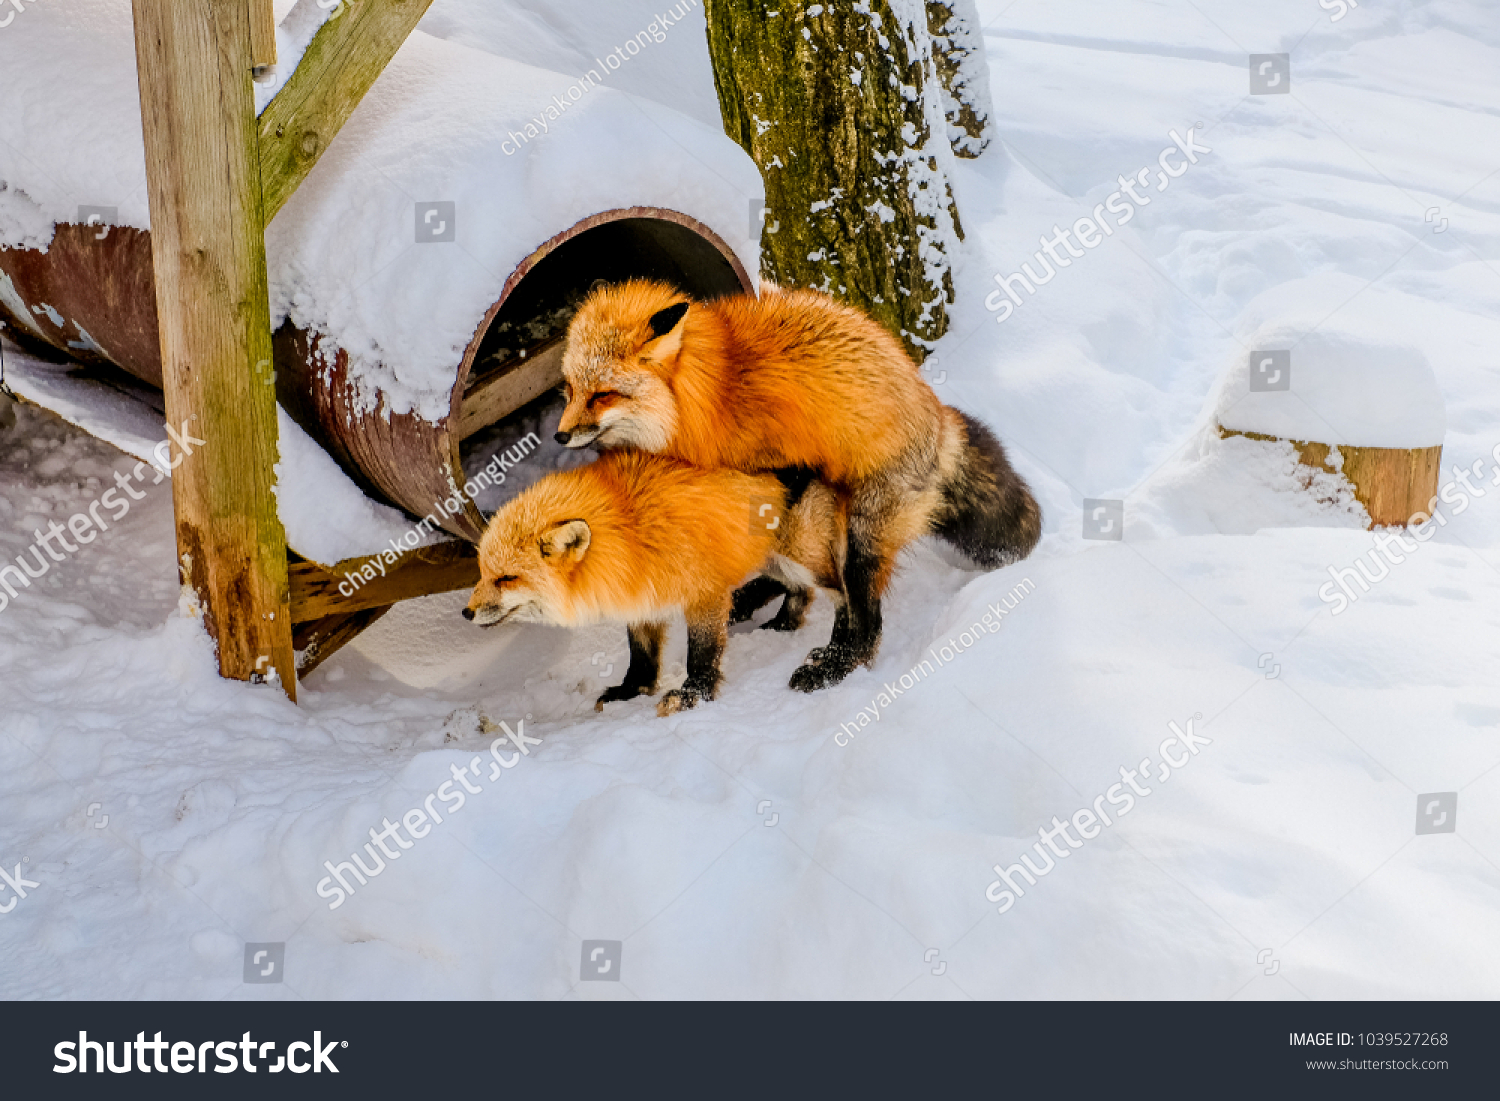 stock-photo-fox-breeding-animal-breeding-having-sex-which-is-male-and-female-were-mixed-breed-each-other-1039527268.jpg